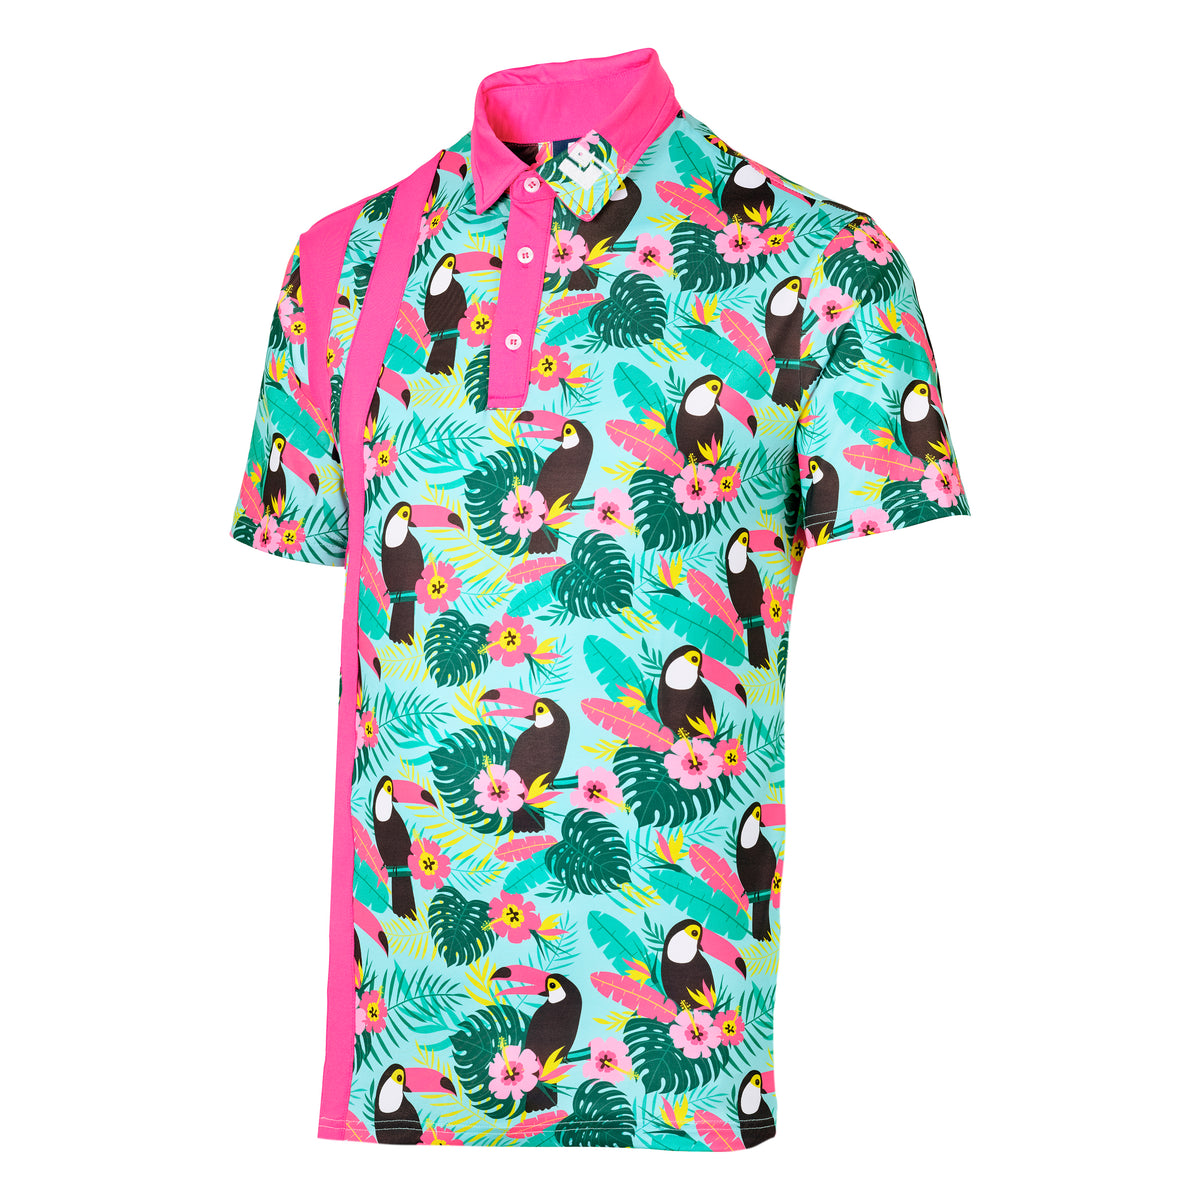 Buried Elephant Golf Polo - Toucan print with Pink